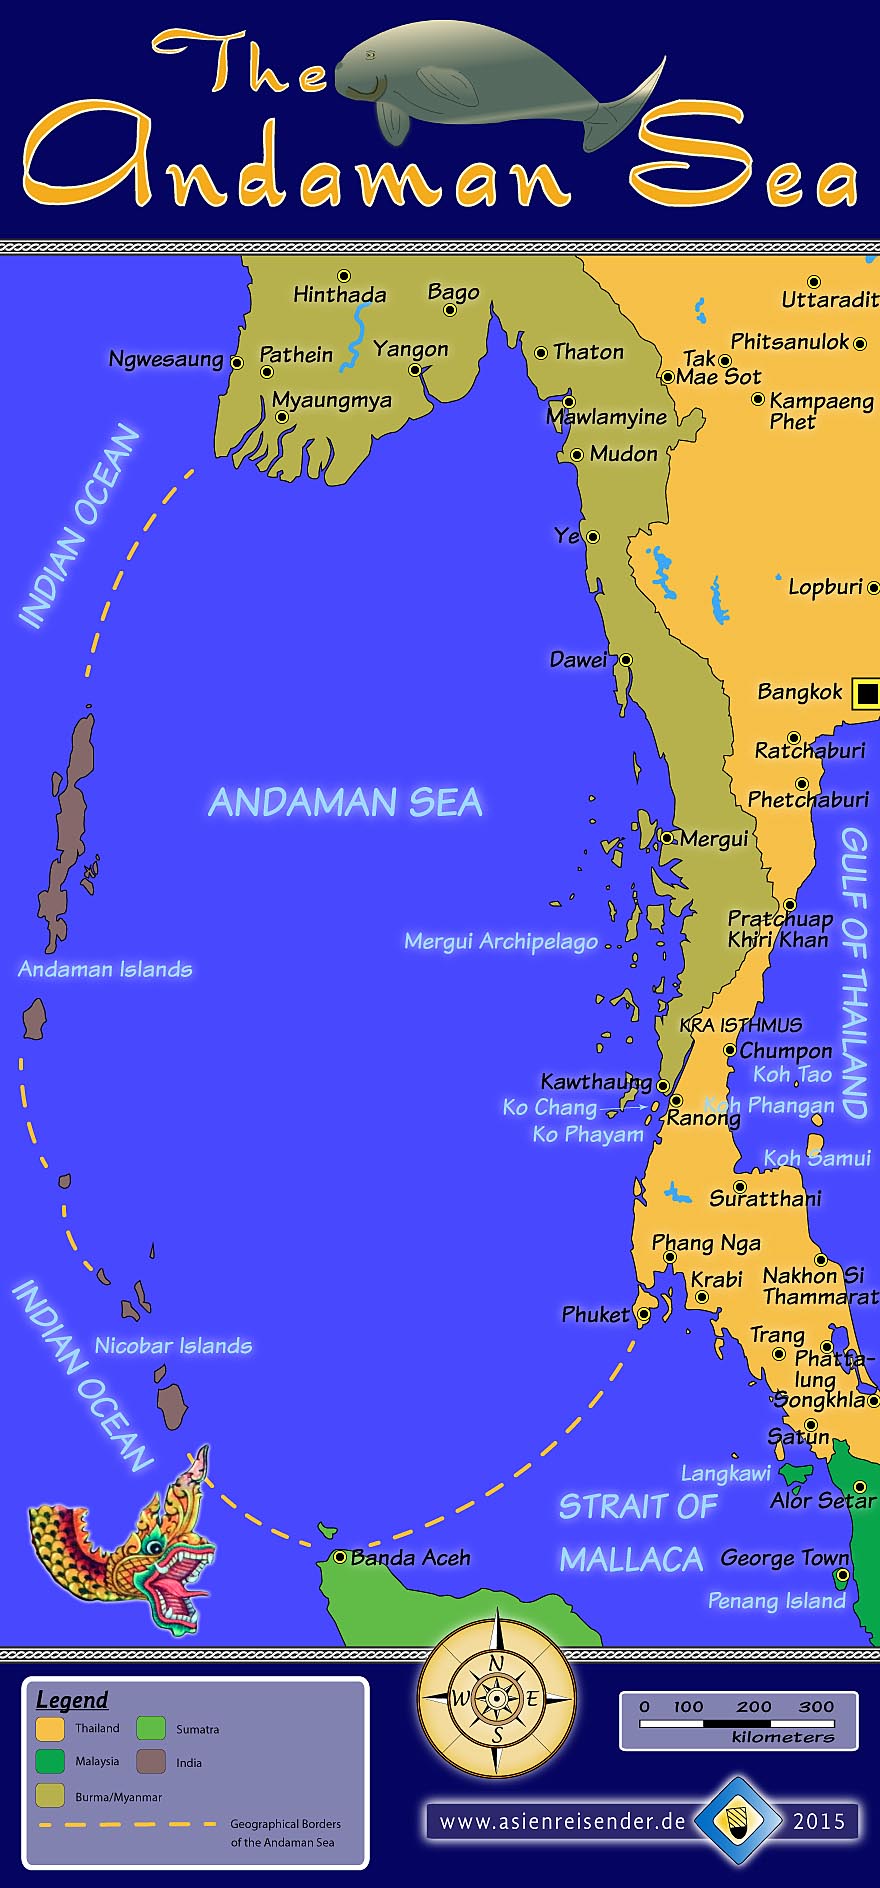 'Interactive Map of the Andaman Sea' by Asienreisender